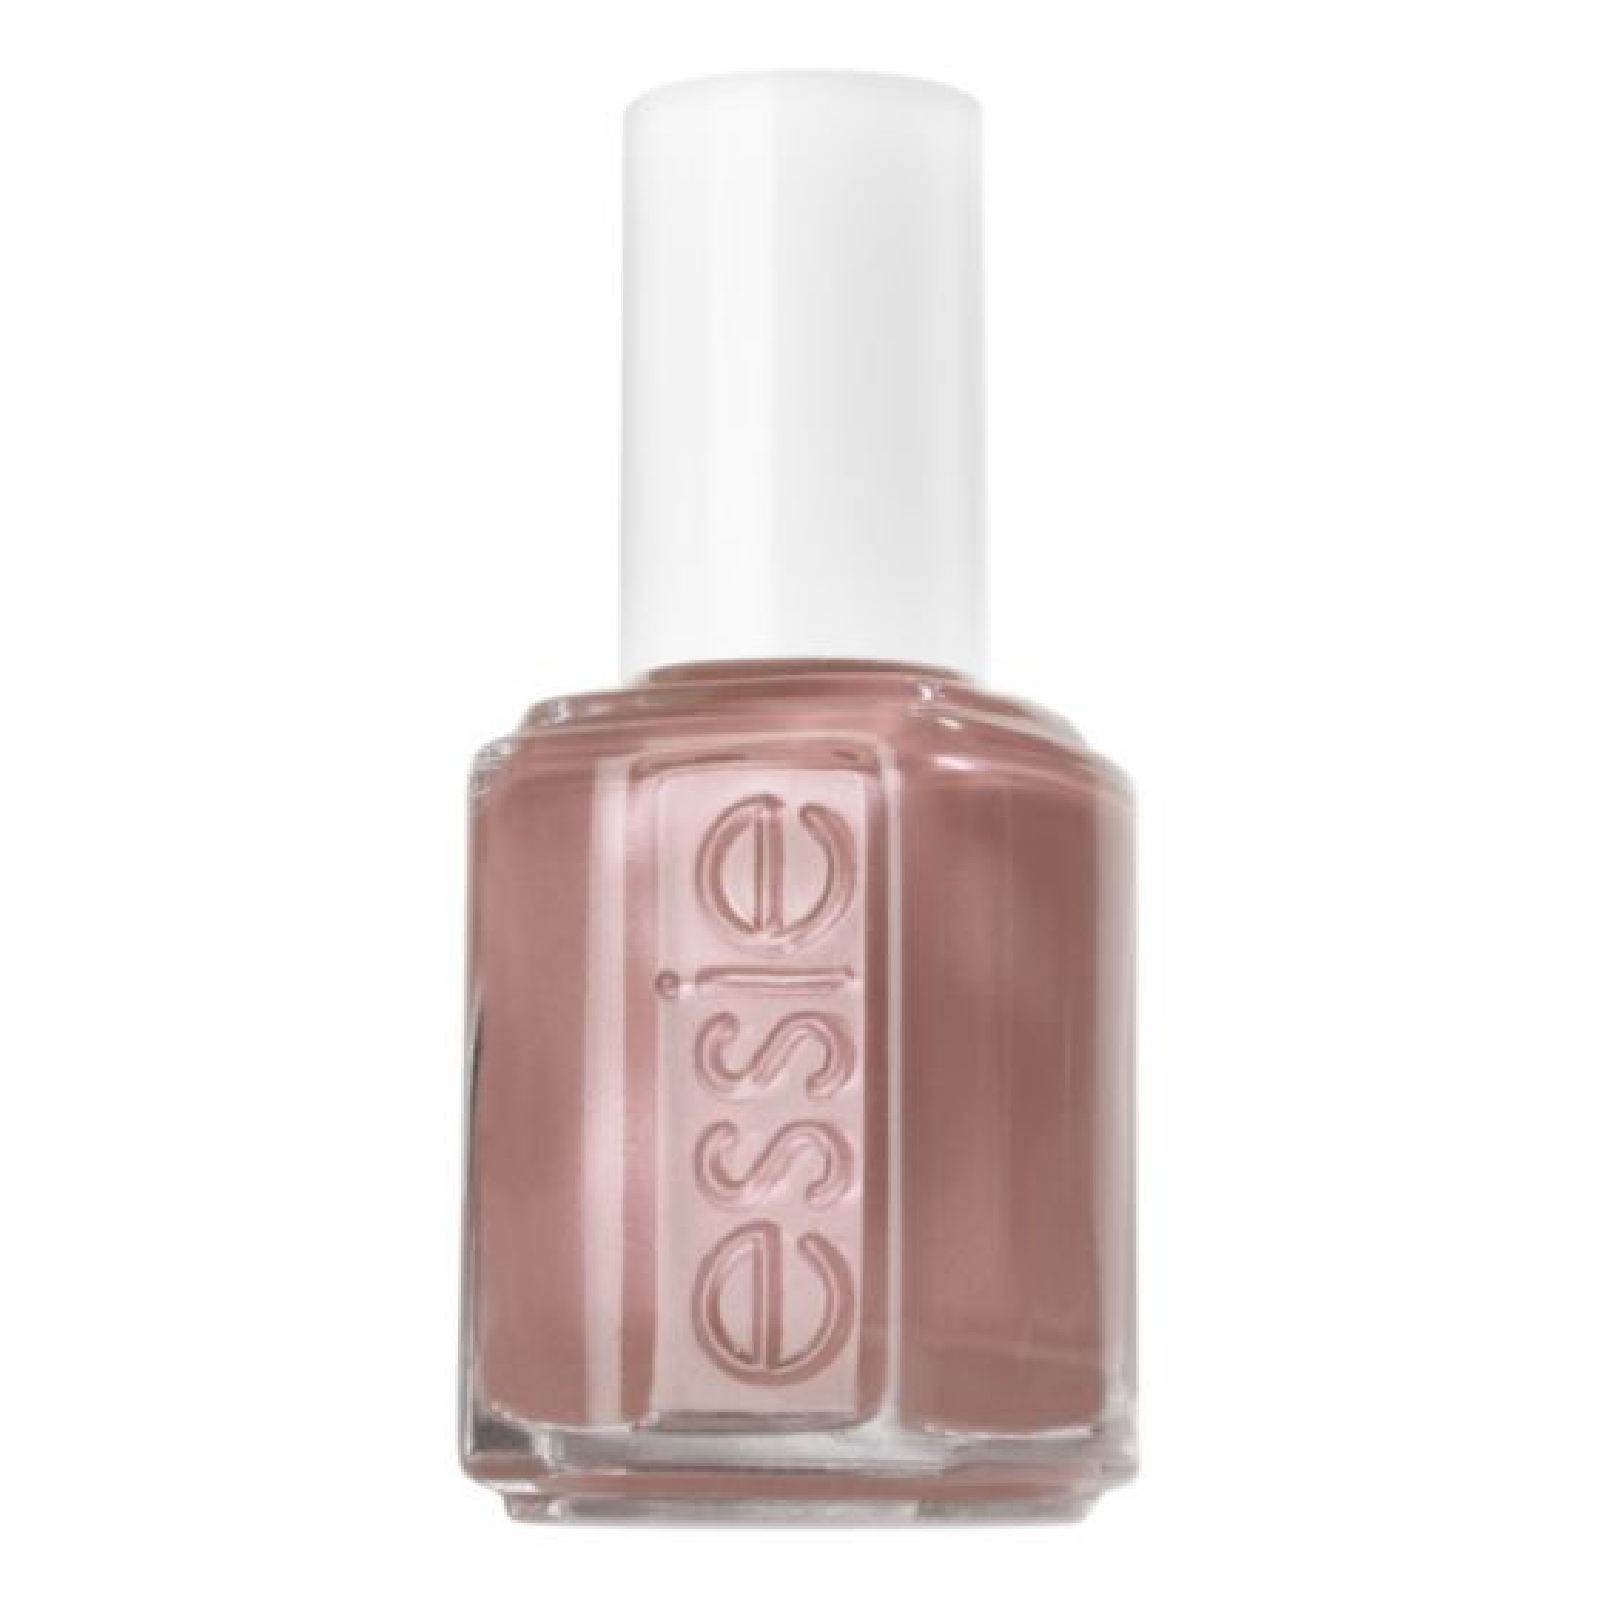 essie Professional Buy Me A Cameo Nail Varnish (13.5ml)